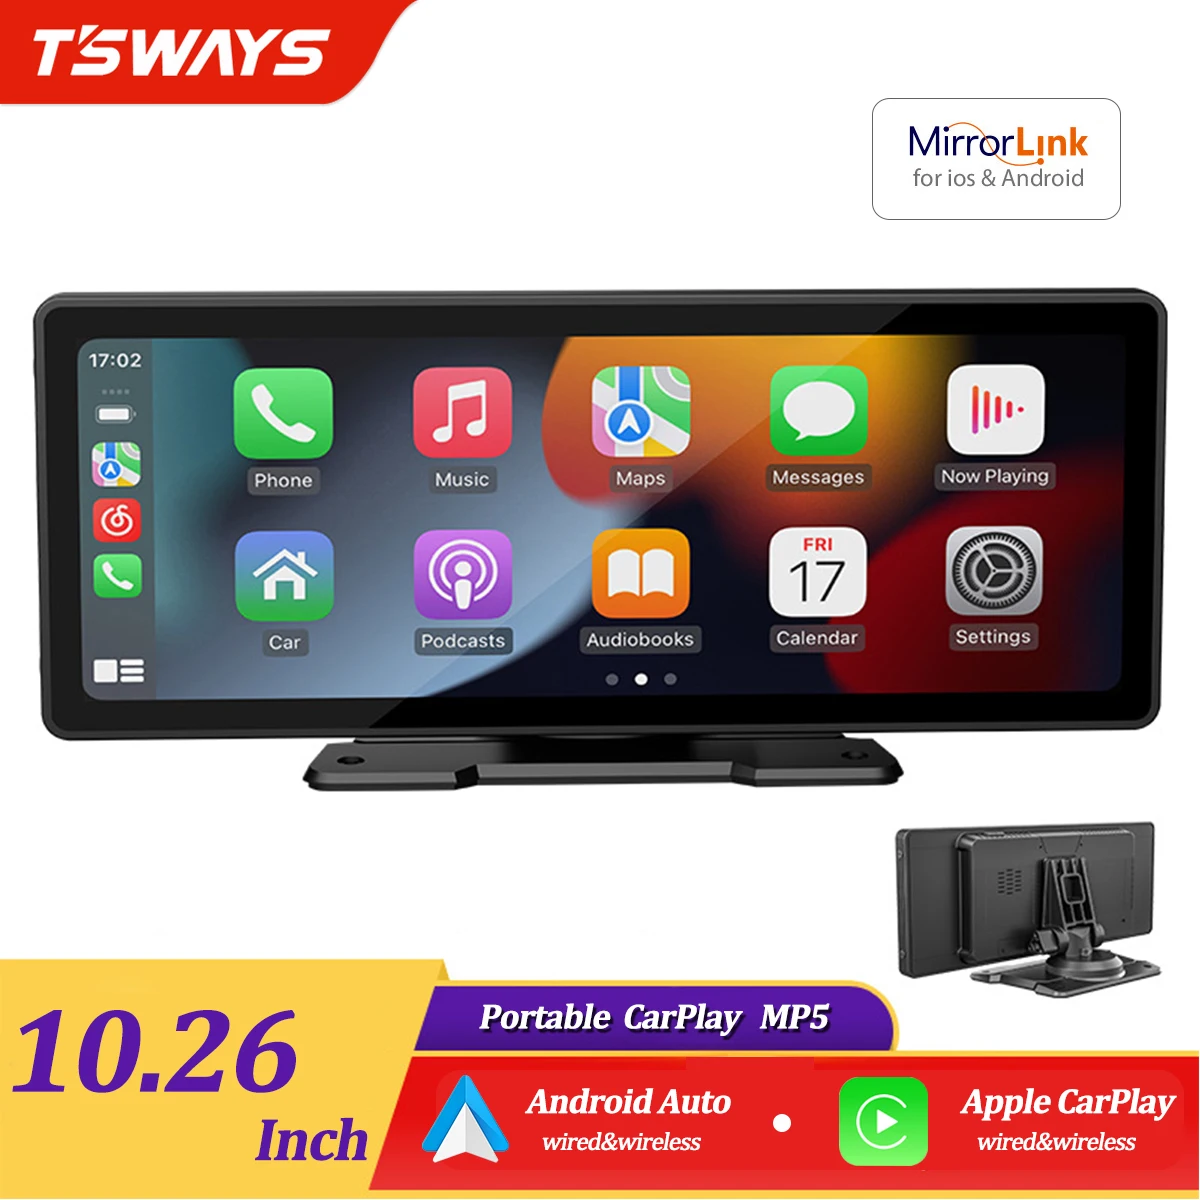 

Tsways Portable CarPlay MP5 Player 10.2-inch multimedia video player supports Mirror Link and Auto/ carplay reverse display